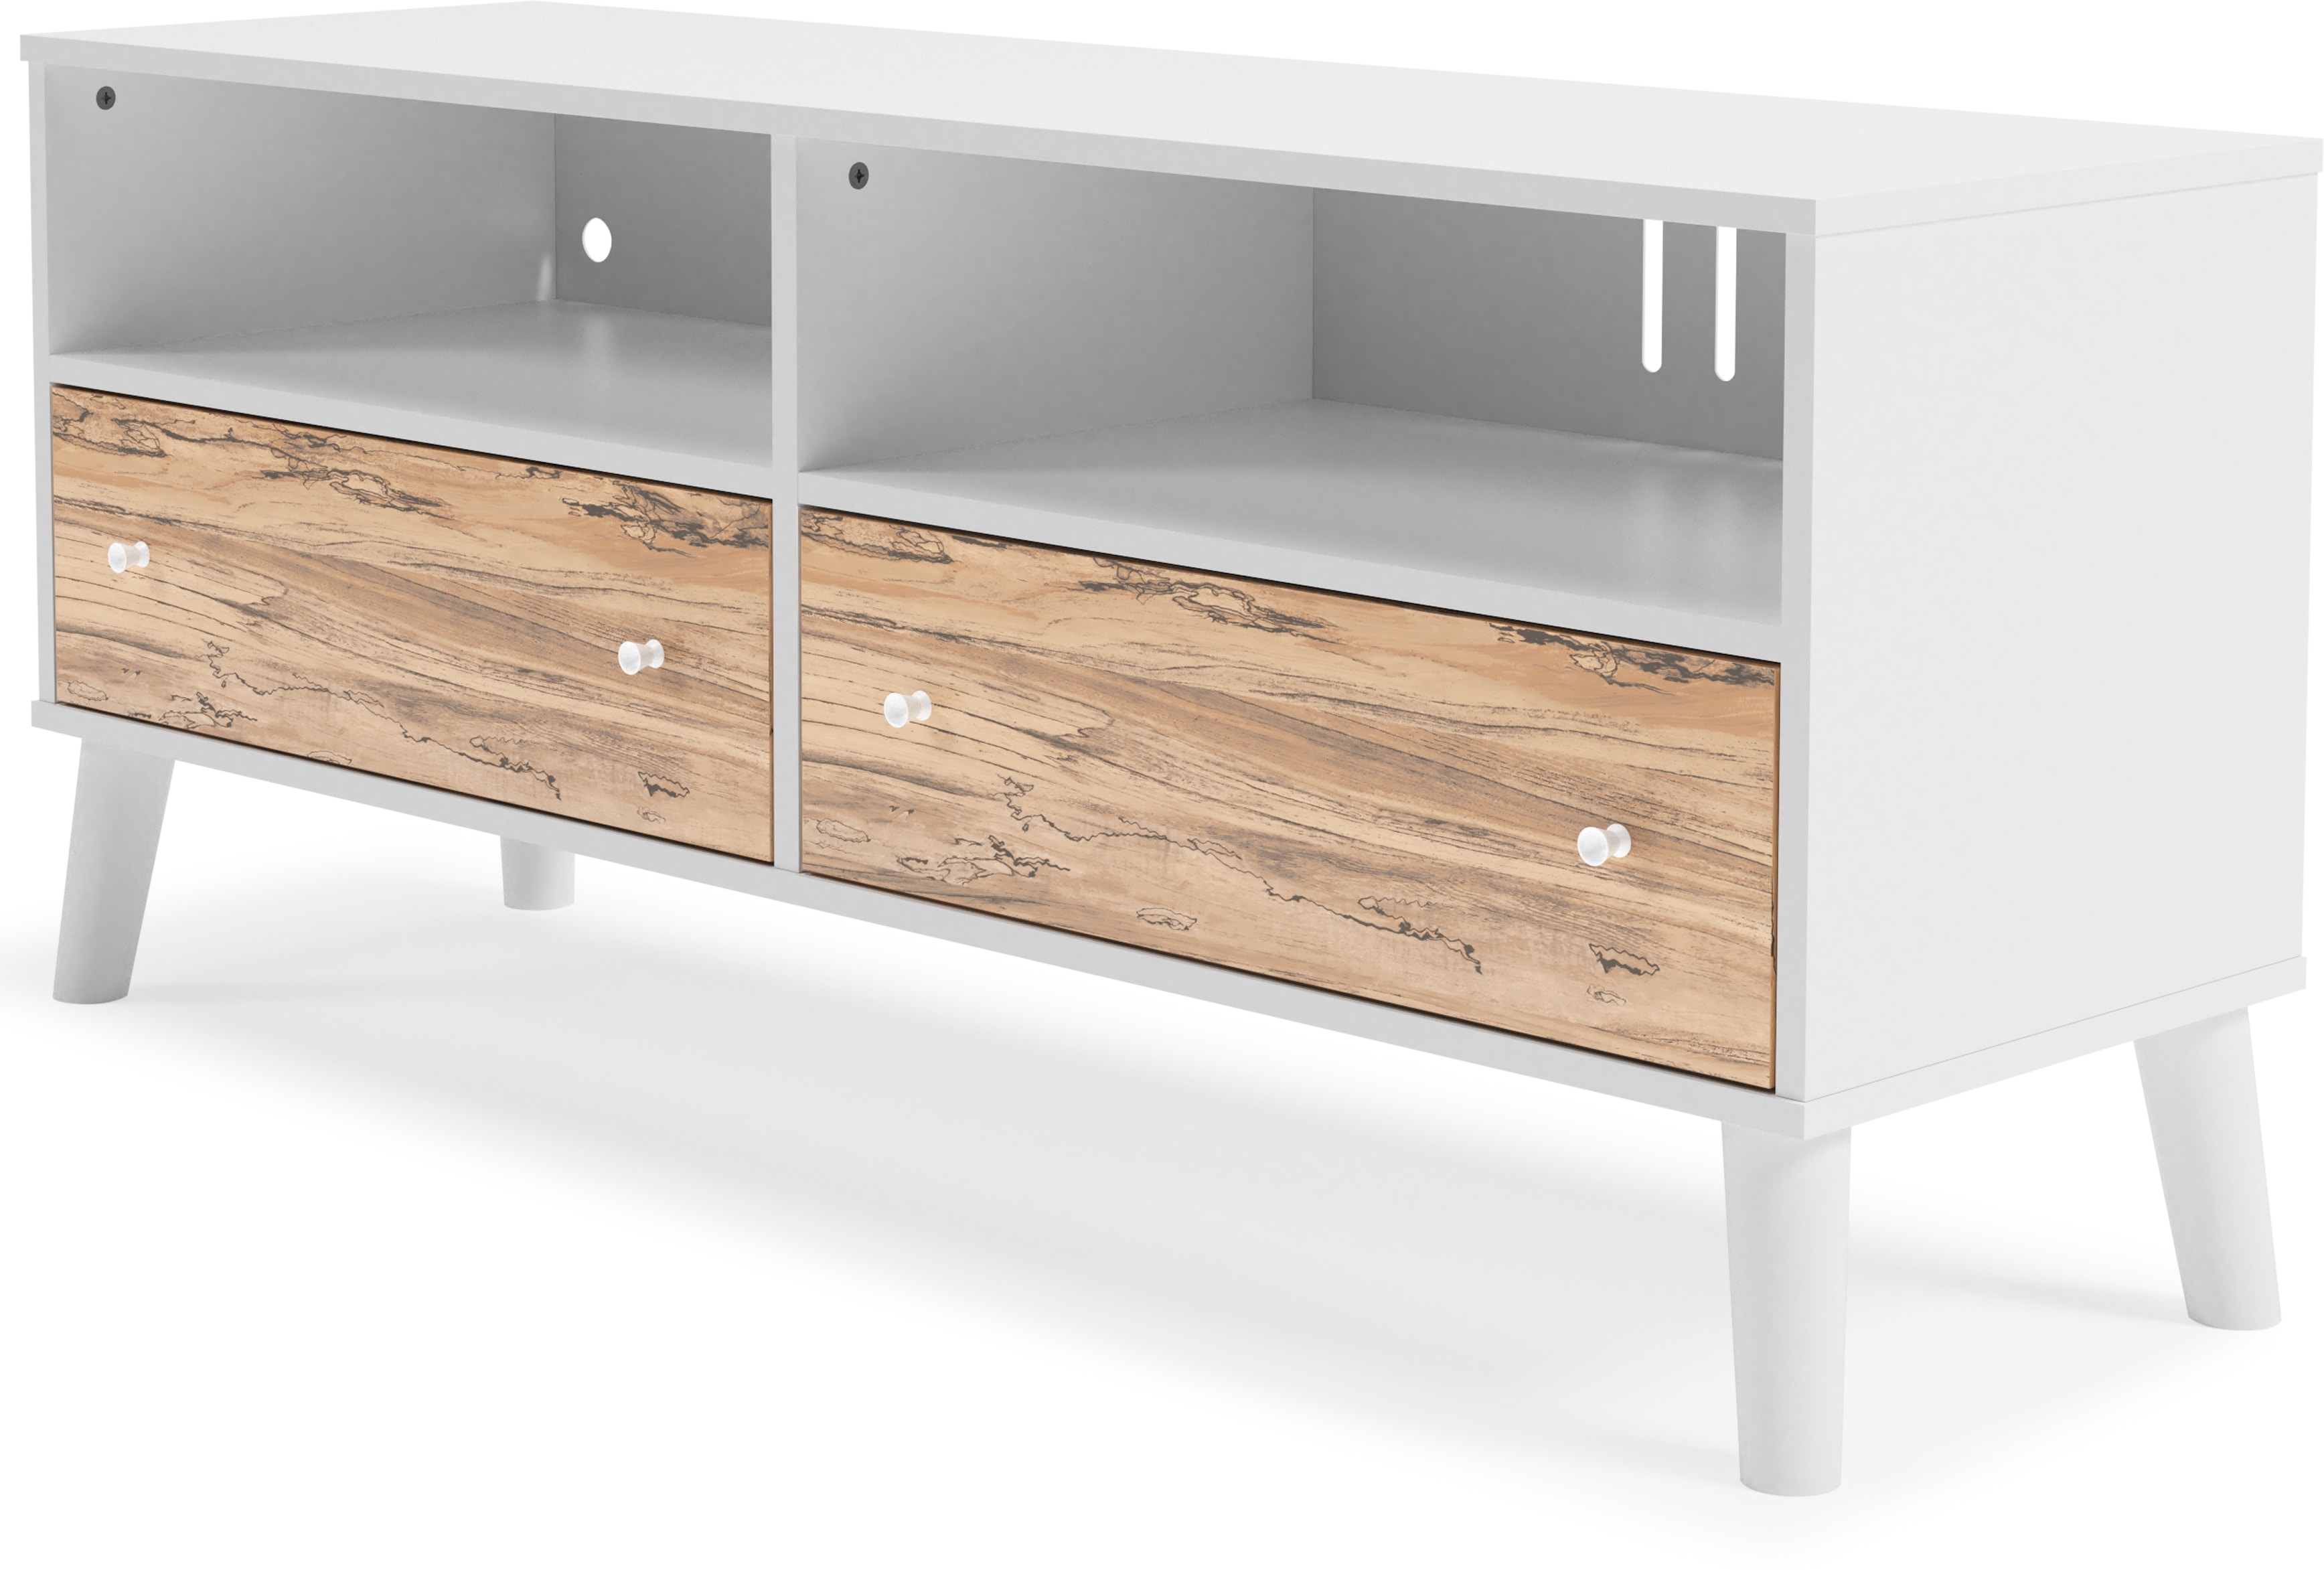 Design by Ashley Home Entertainment Piperton Medium TV Stand EW1221-168 - The Cleveland